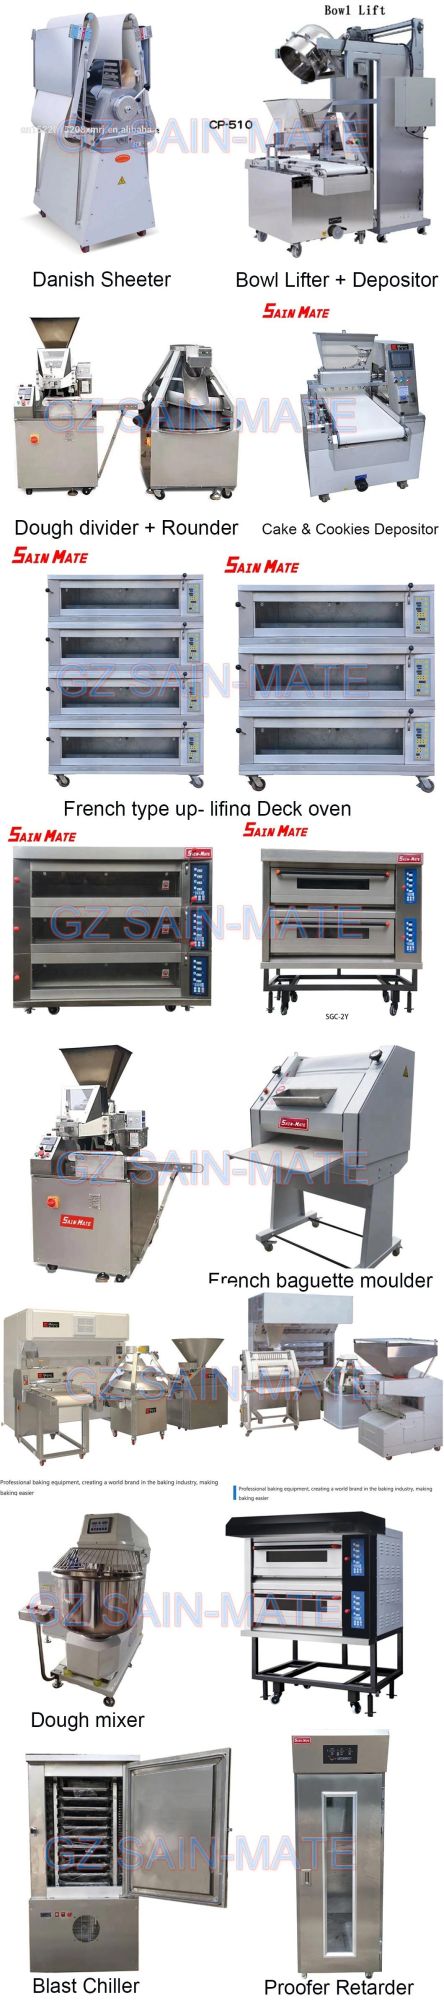 32 16 12 Trays Rotary Oven for Bakery, 12 Tray Rotary Oven for Sale Philippines